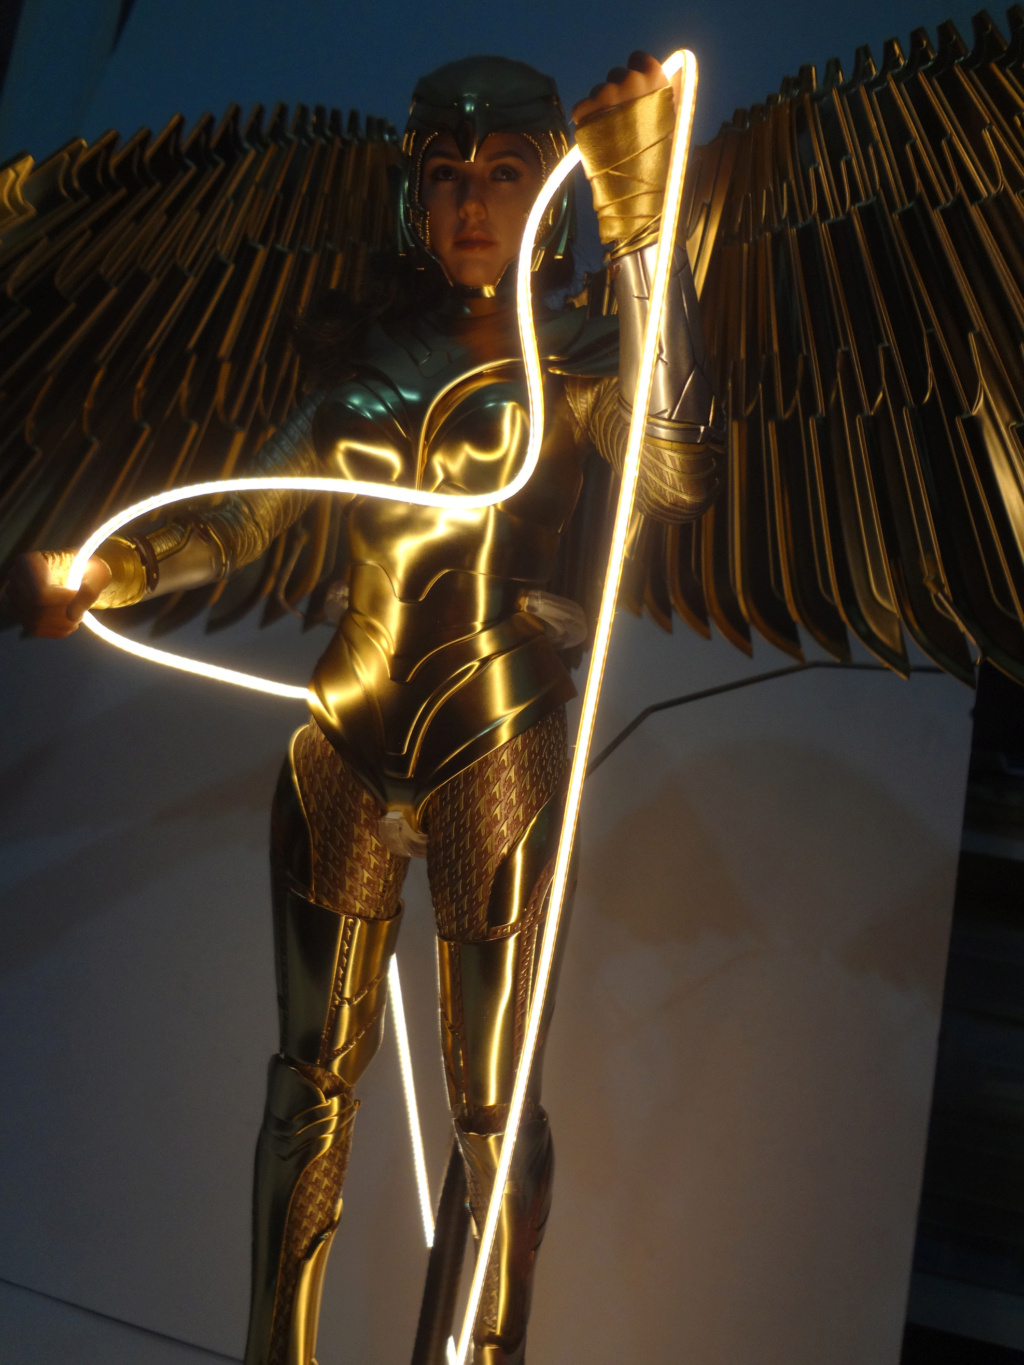 DCU - NEW PRODUCT: HOT TOYS: WONDER WOMAN 1984: GOLDEN ARMOR WONDER WOMAN 1/6TH SCALE COLLECTIBLE FIGURE (Standard & Deluxe Versions) - Page 2 Dsc04217